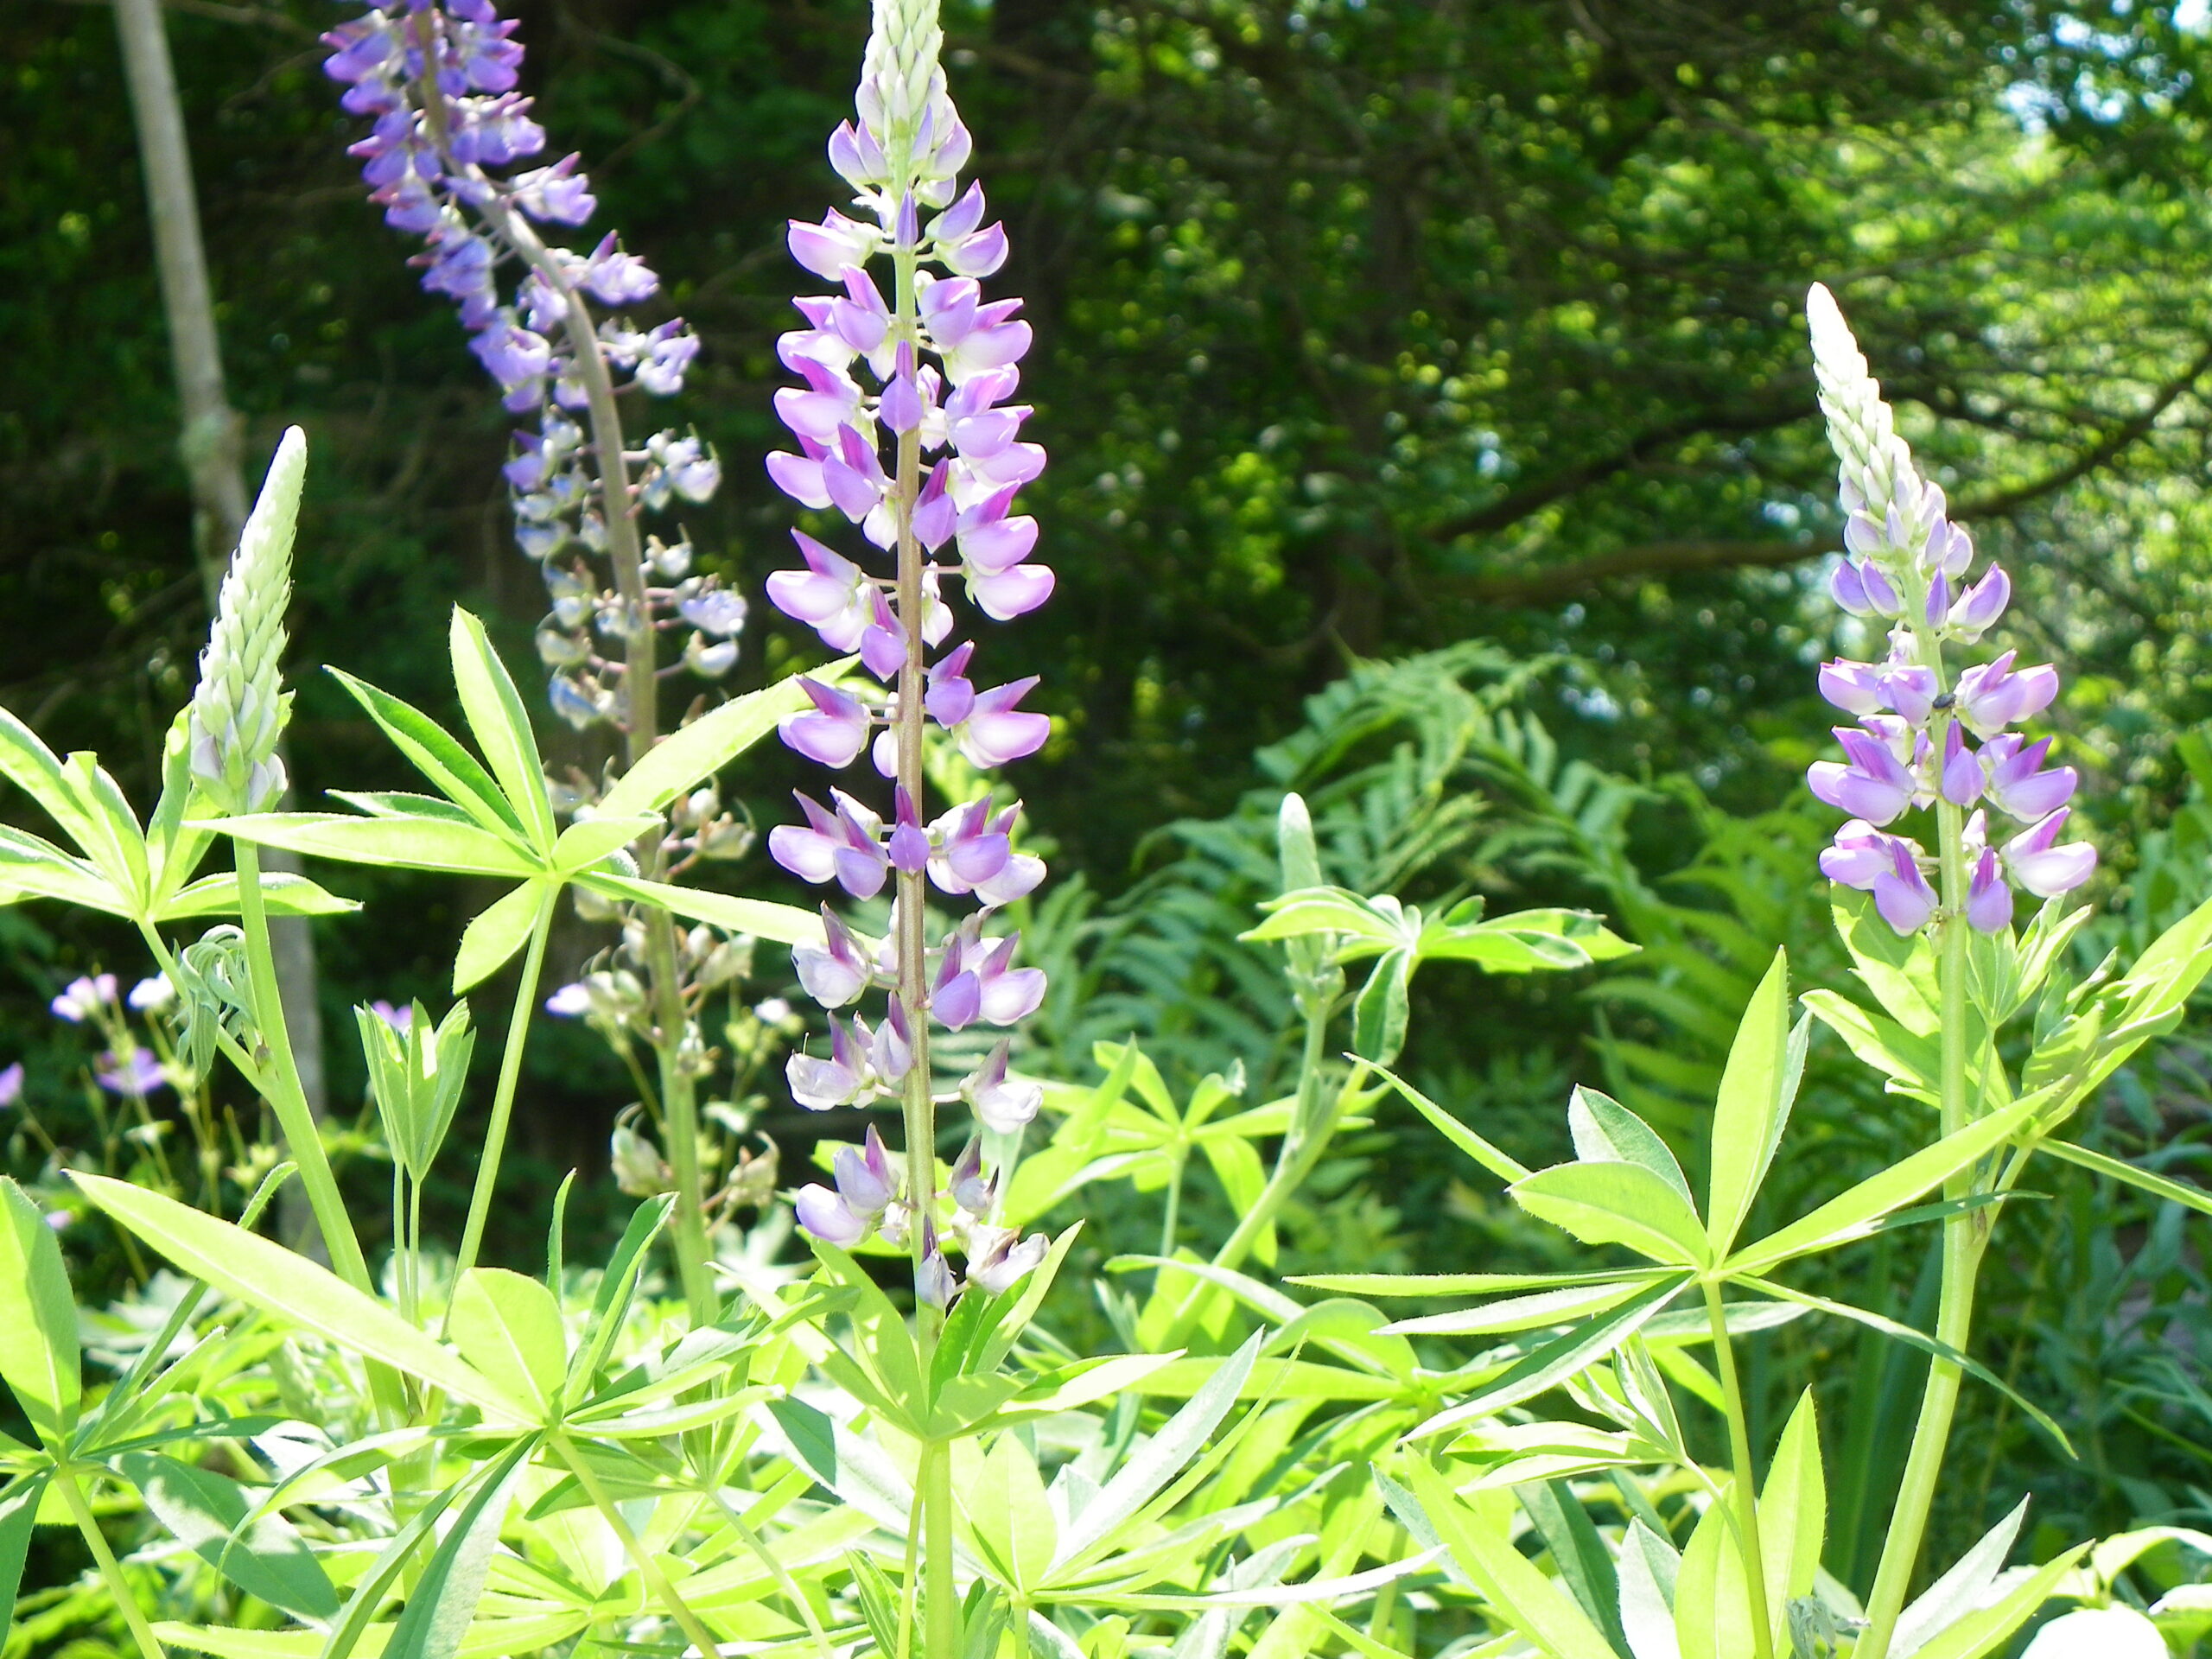 Lupines flowers